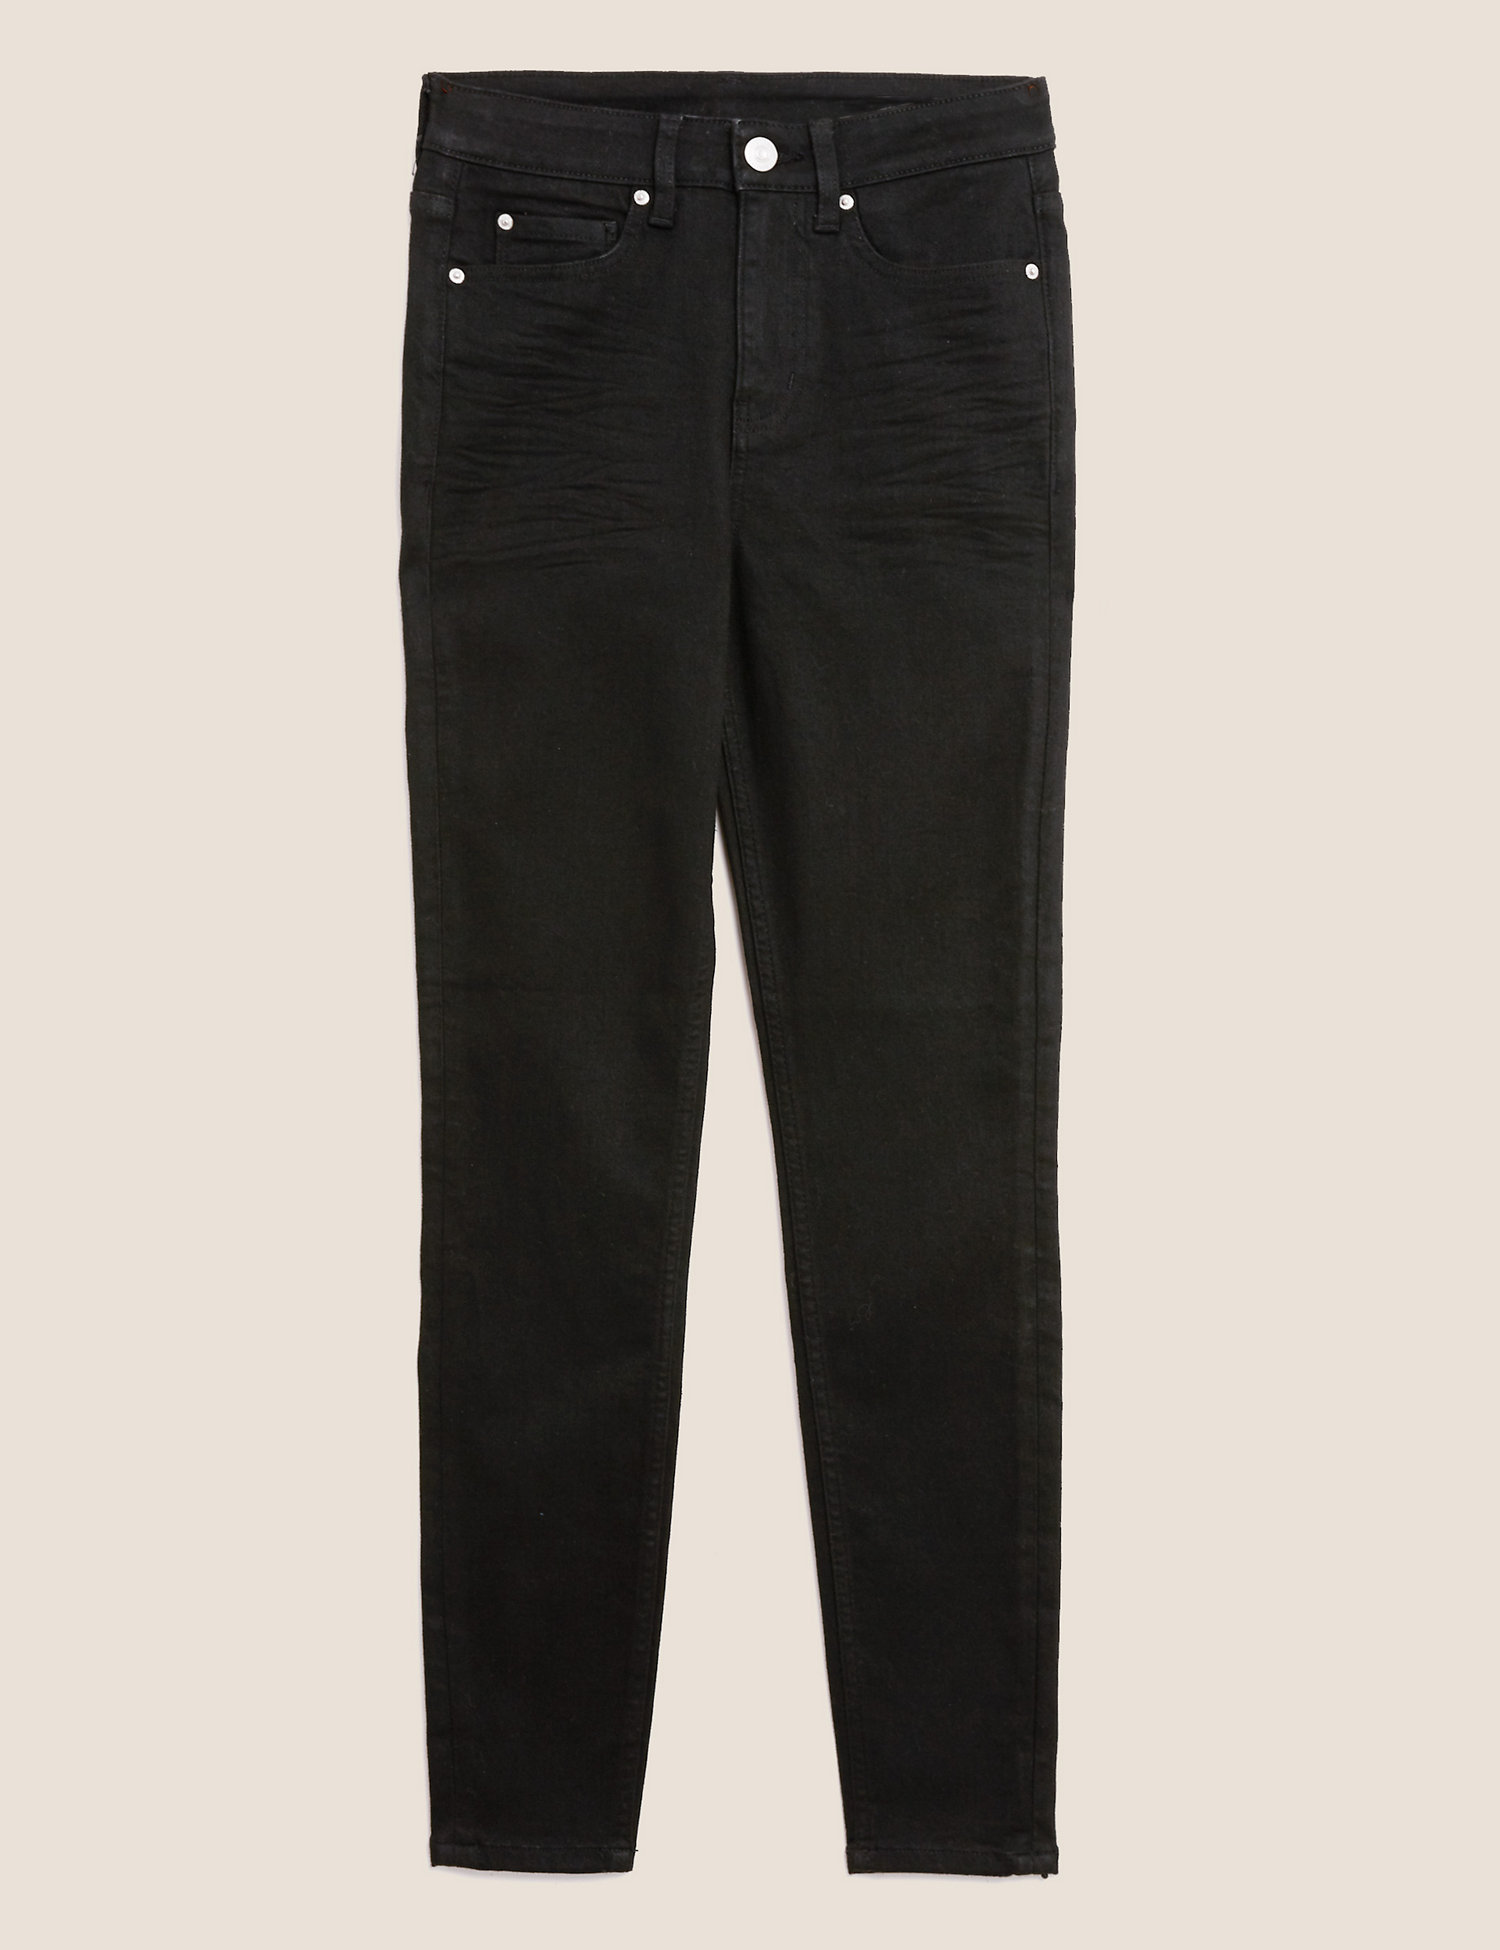 M&S Ivy Skinny Jeans in black mix